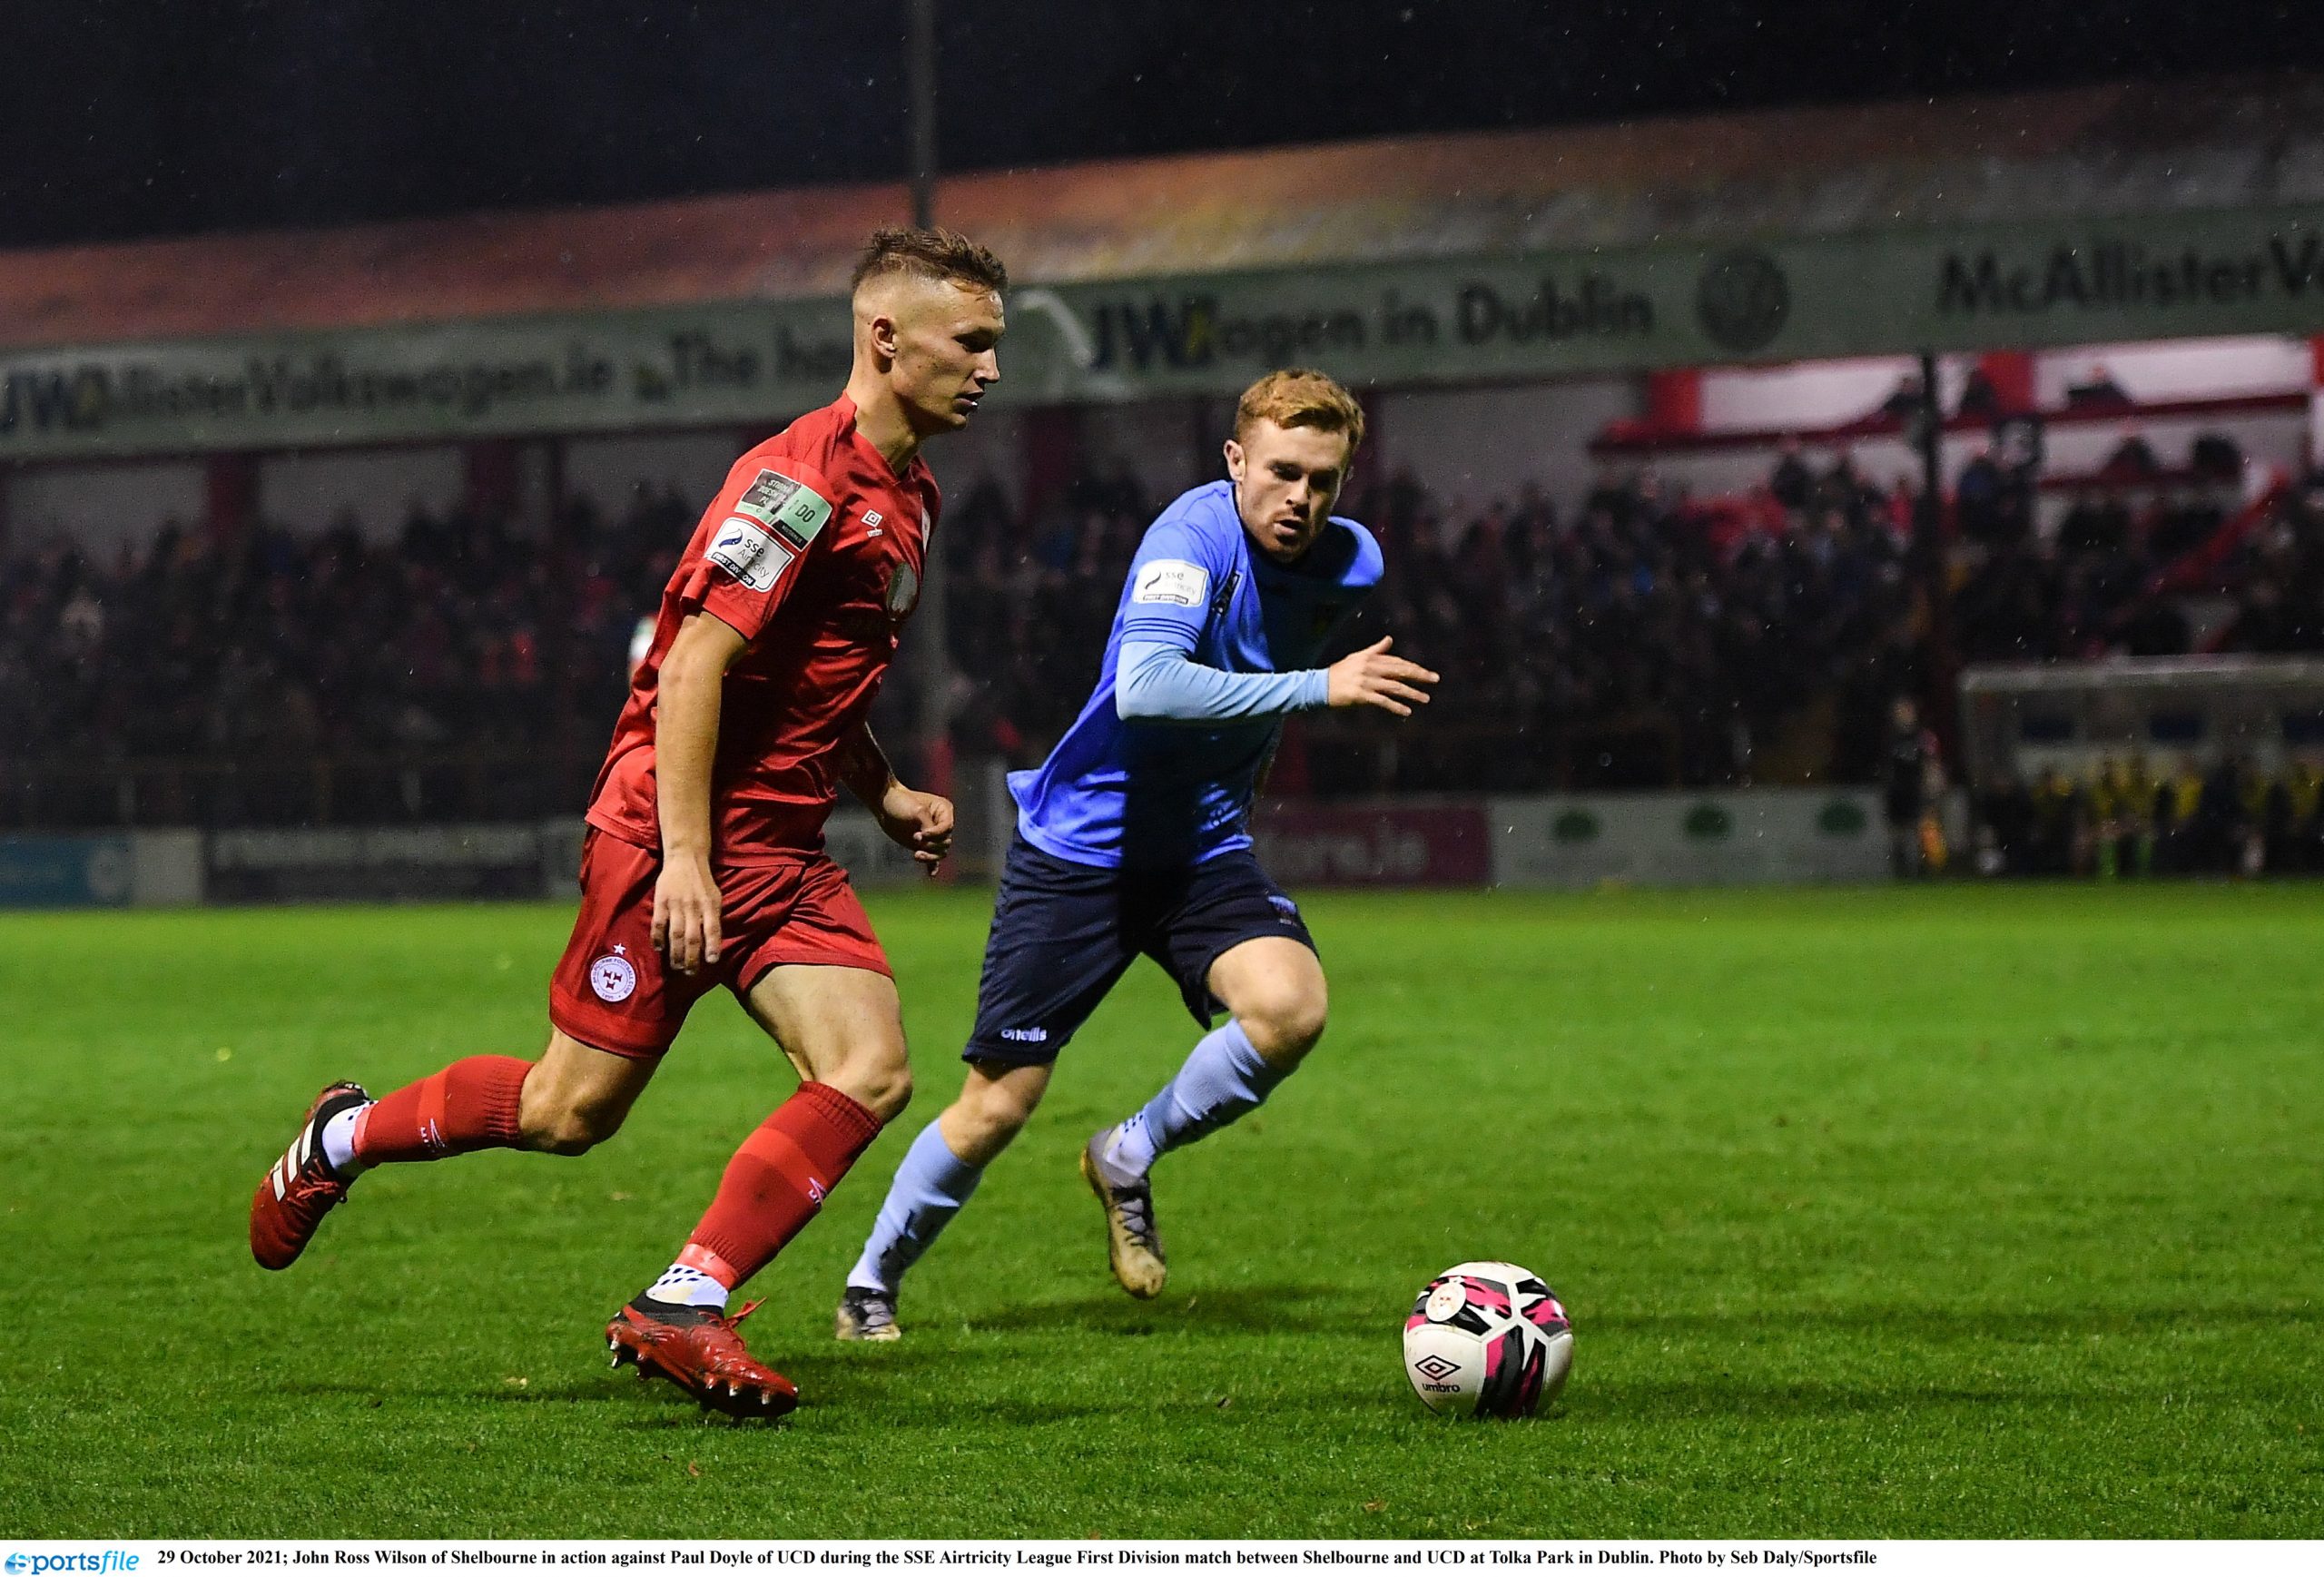 JR Wilson re-signs for Shels